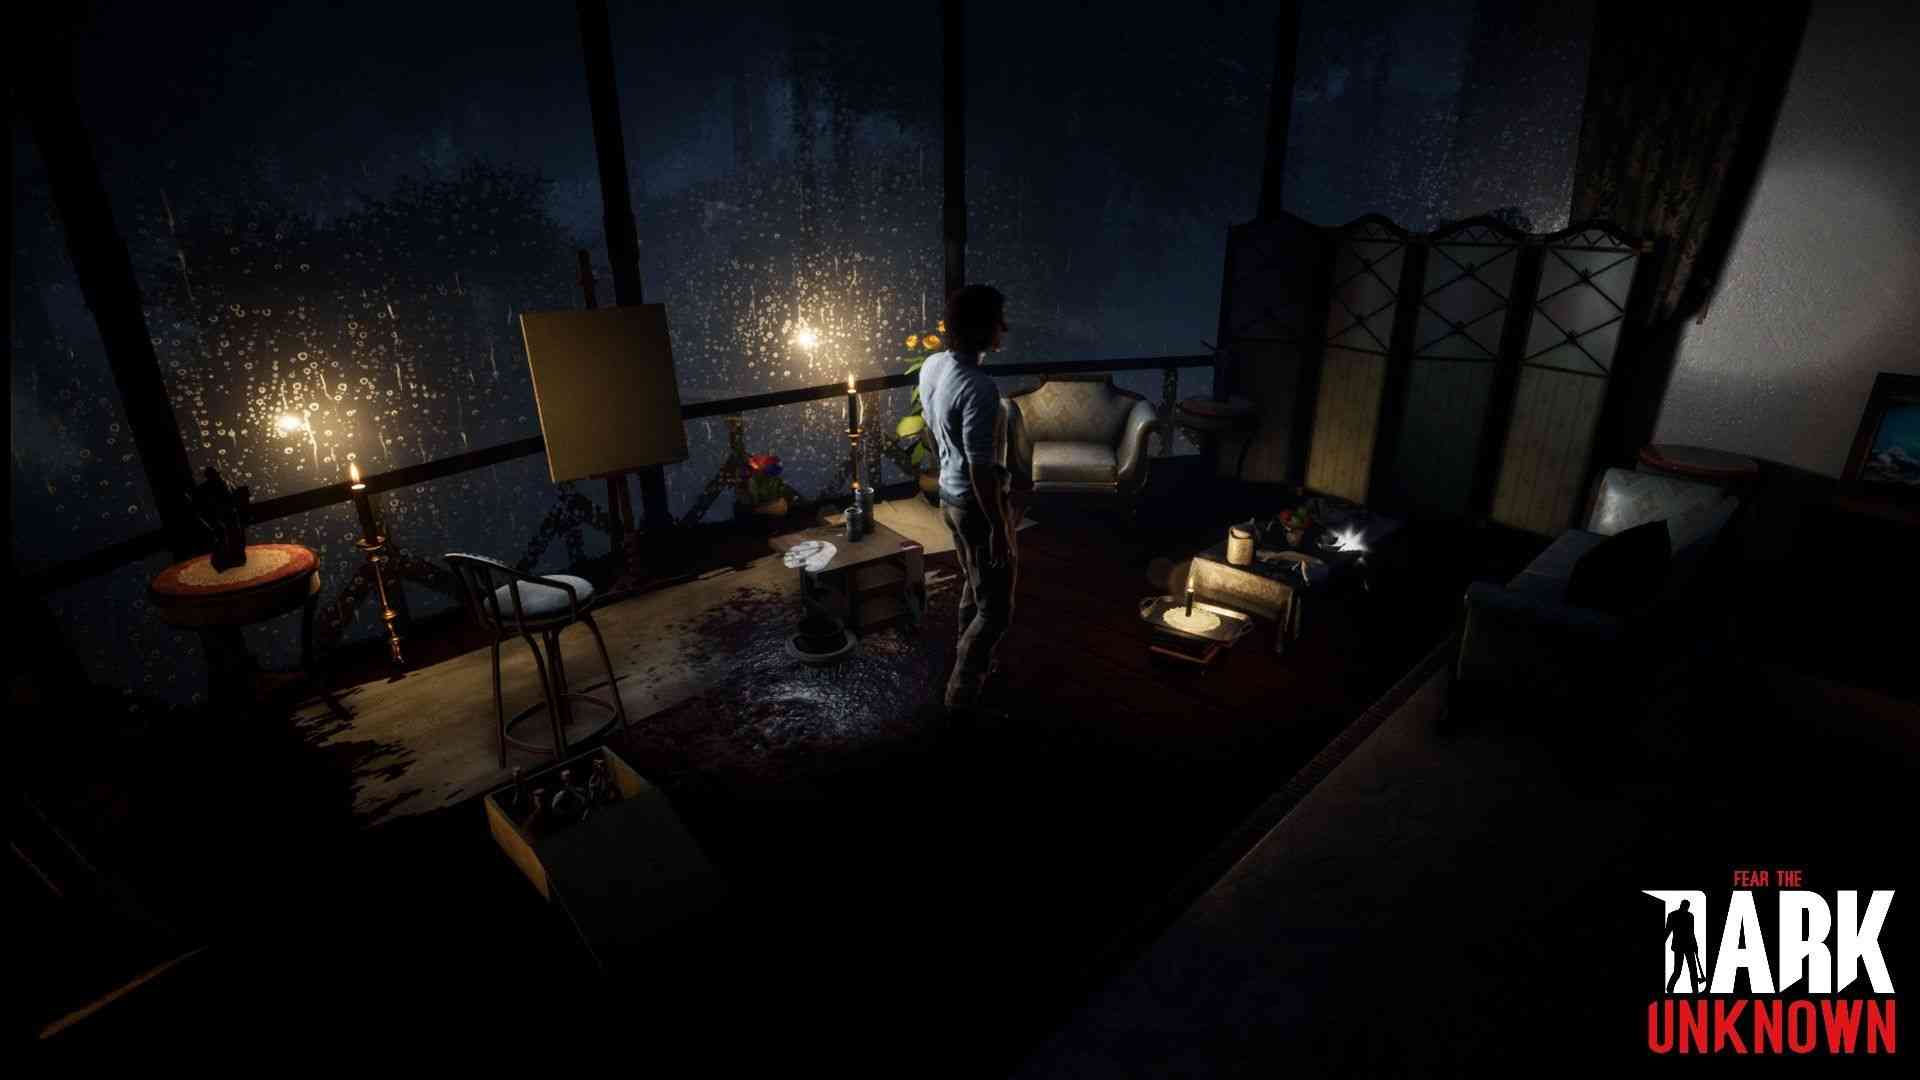 dreamlight games presents a new trailer of fear the dark unknown 1070 big 1